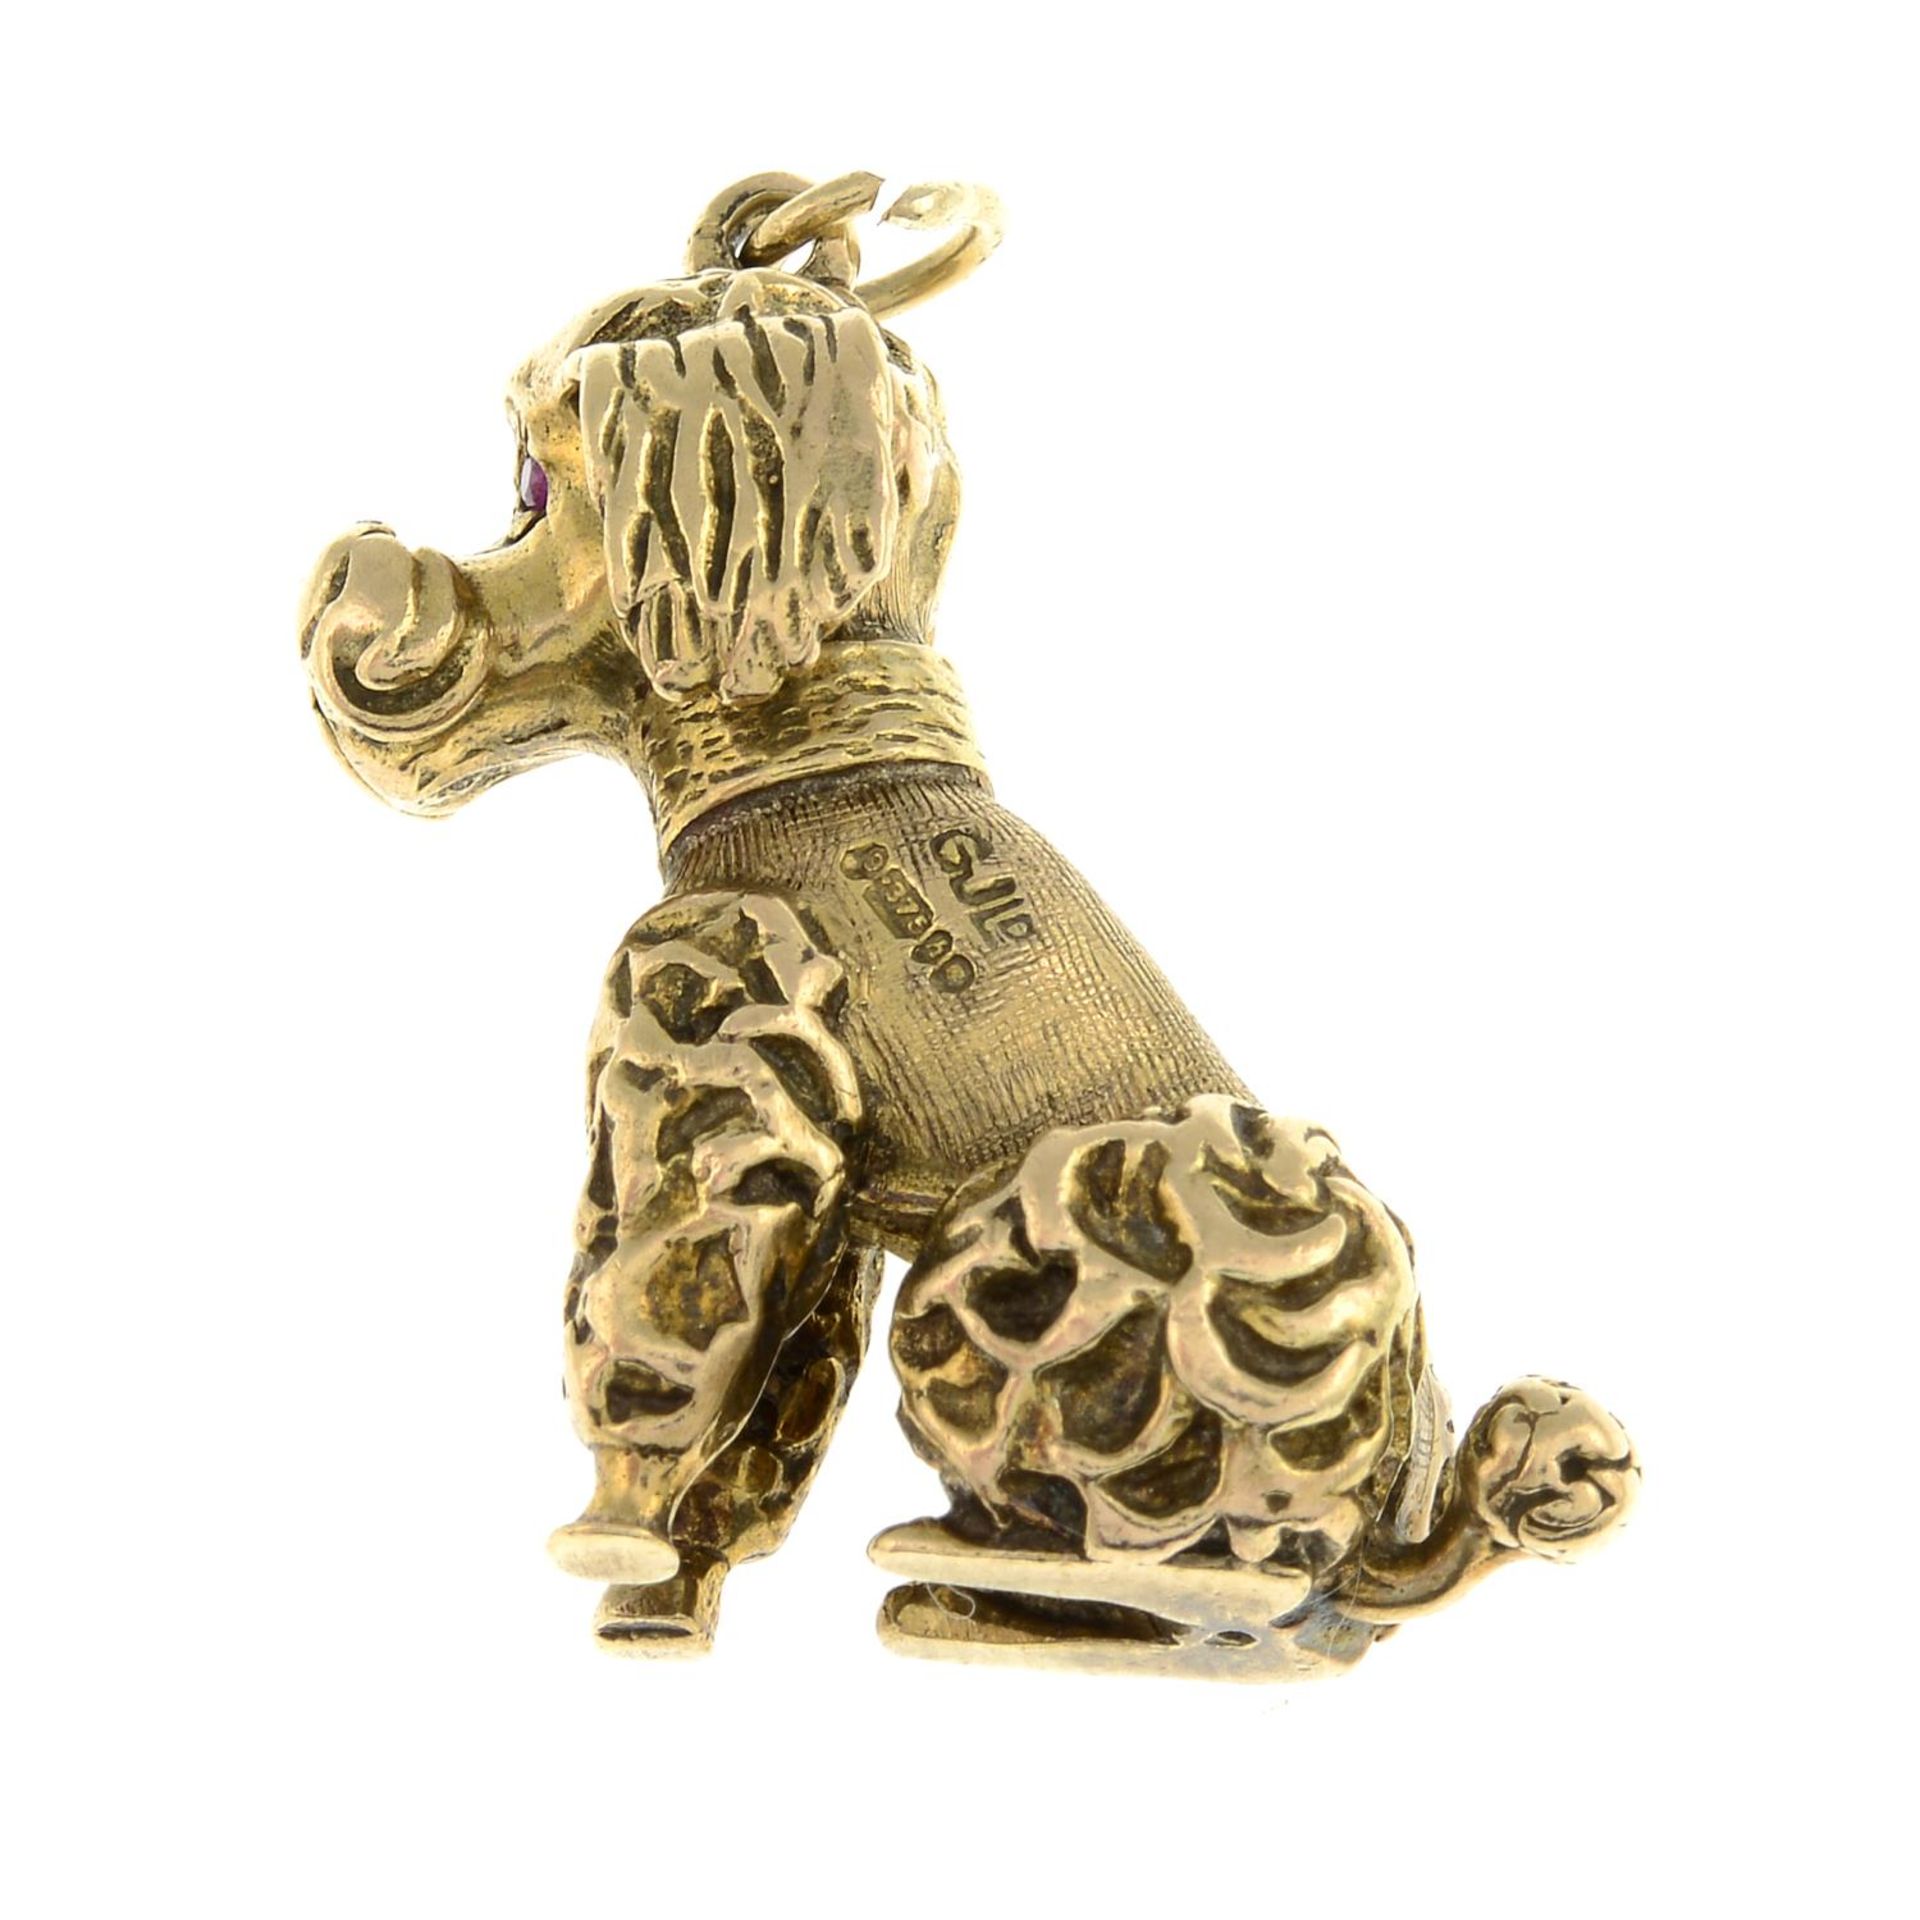 A 9ct gold poodle dog pendant, with synthetic ruby eye highlights.Hallmarks for 9ct gold. - Image 2 of 2